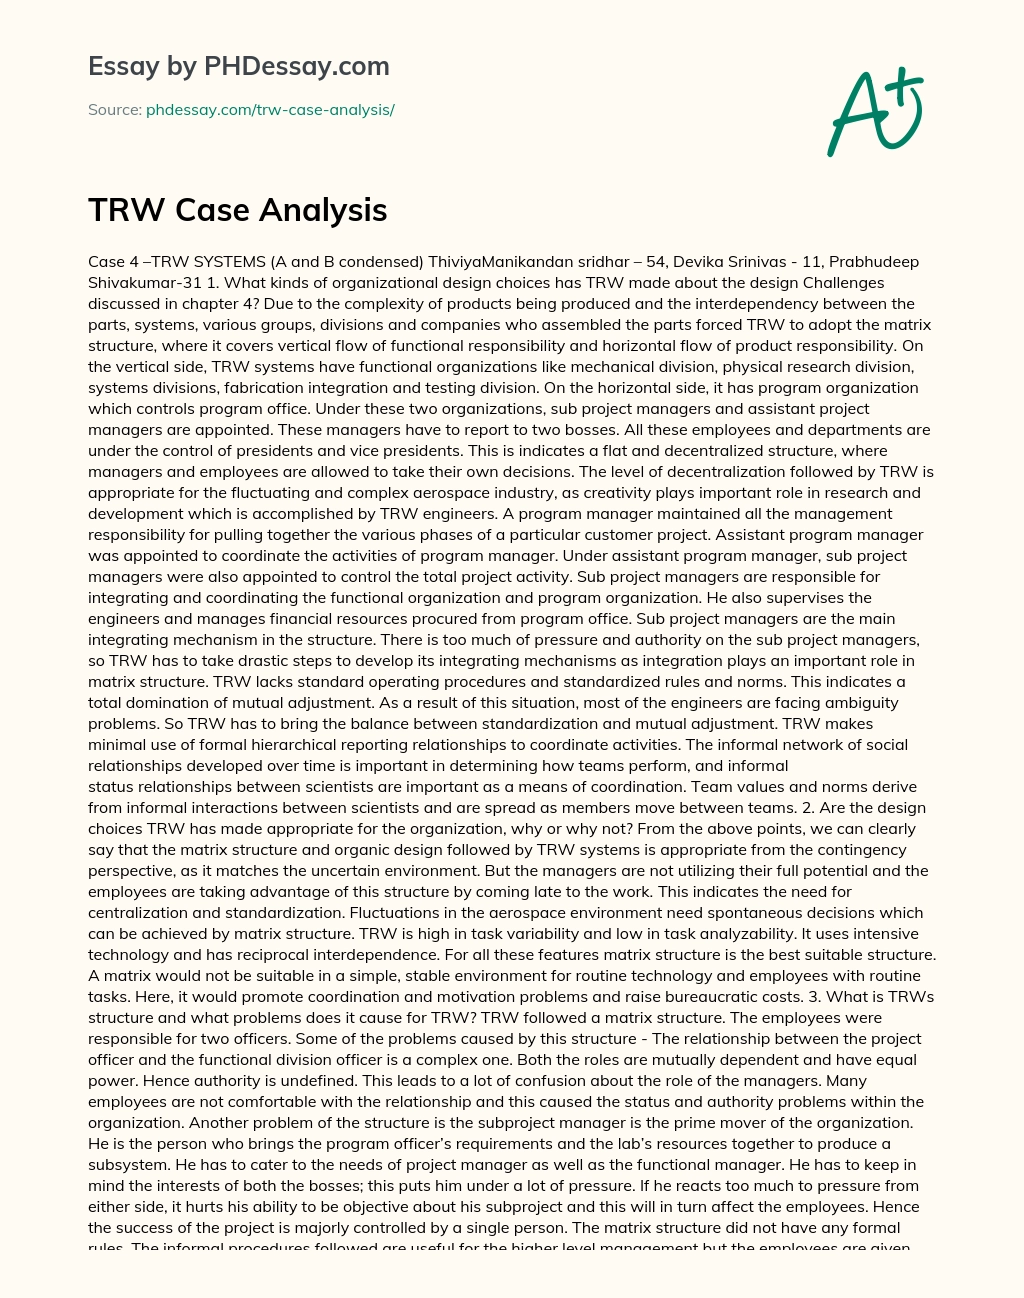 TRW Systems’ Organizational Design Choices for Complex Products essay